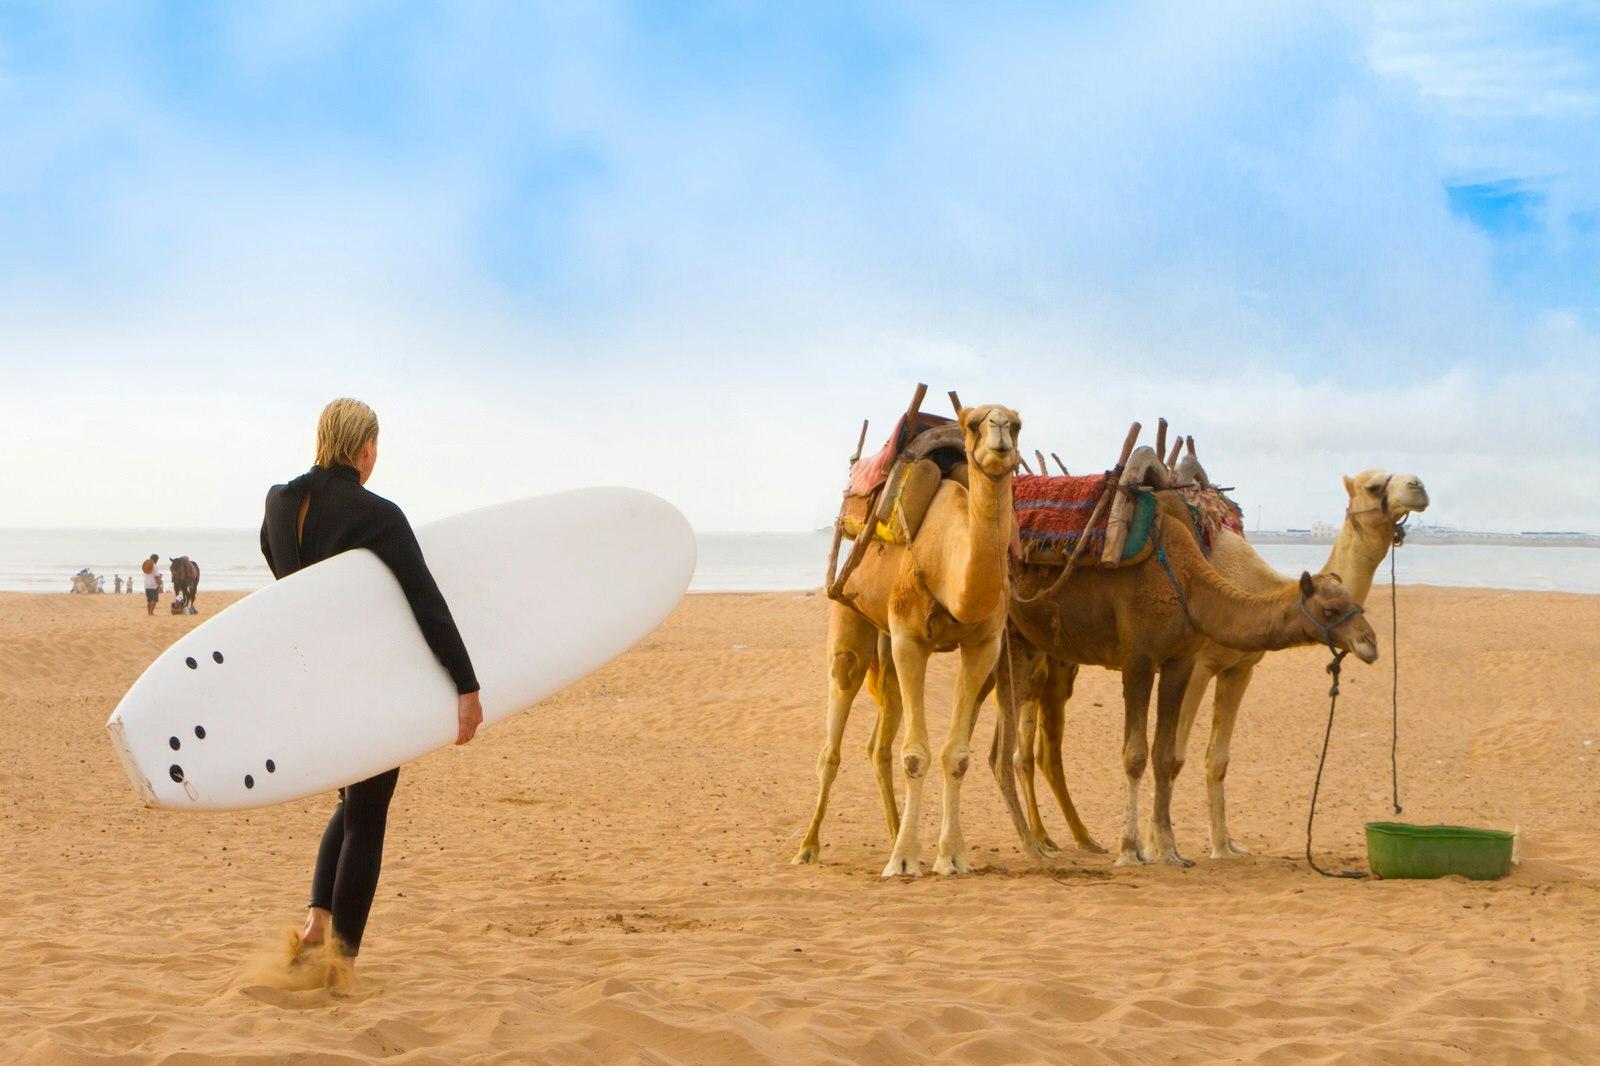 Surfer and camels on Essaouira's town beach, Morocco. Image by Matej Kastelic / 500px